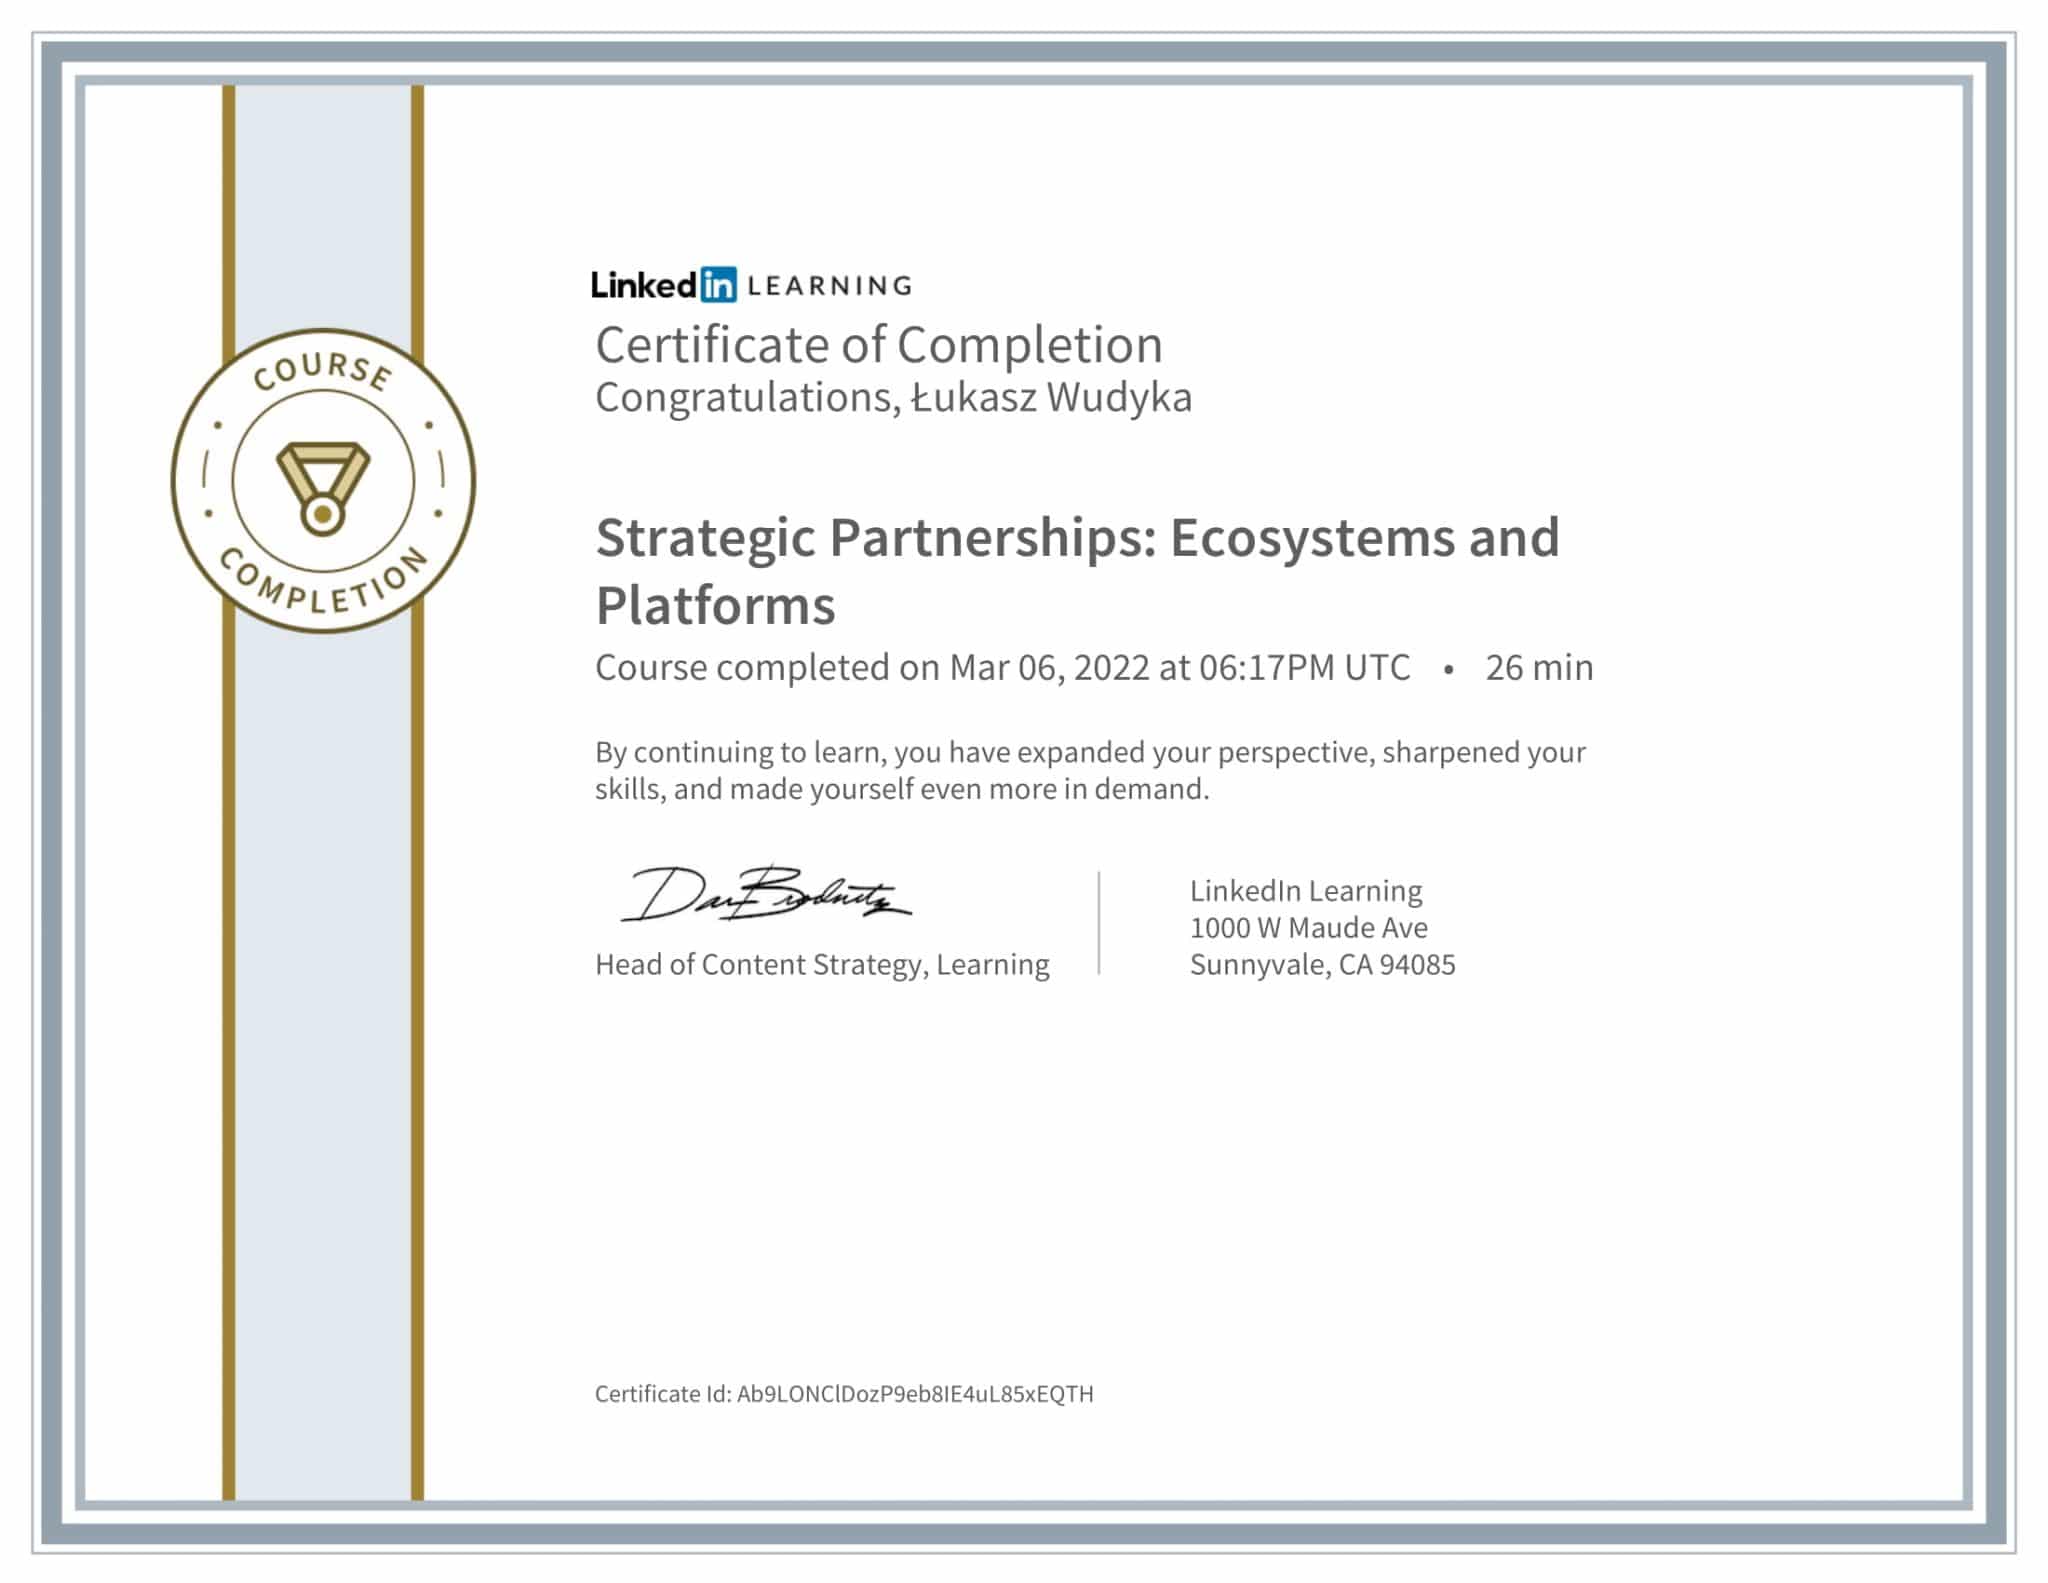 CertificateOfCompletion_Strategic Partnerships Ecosystems and Platforms-1